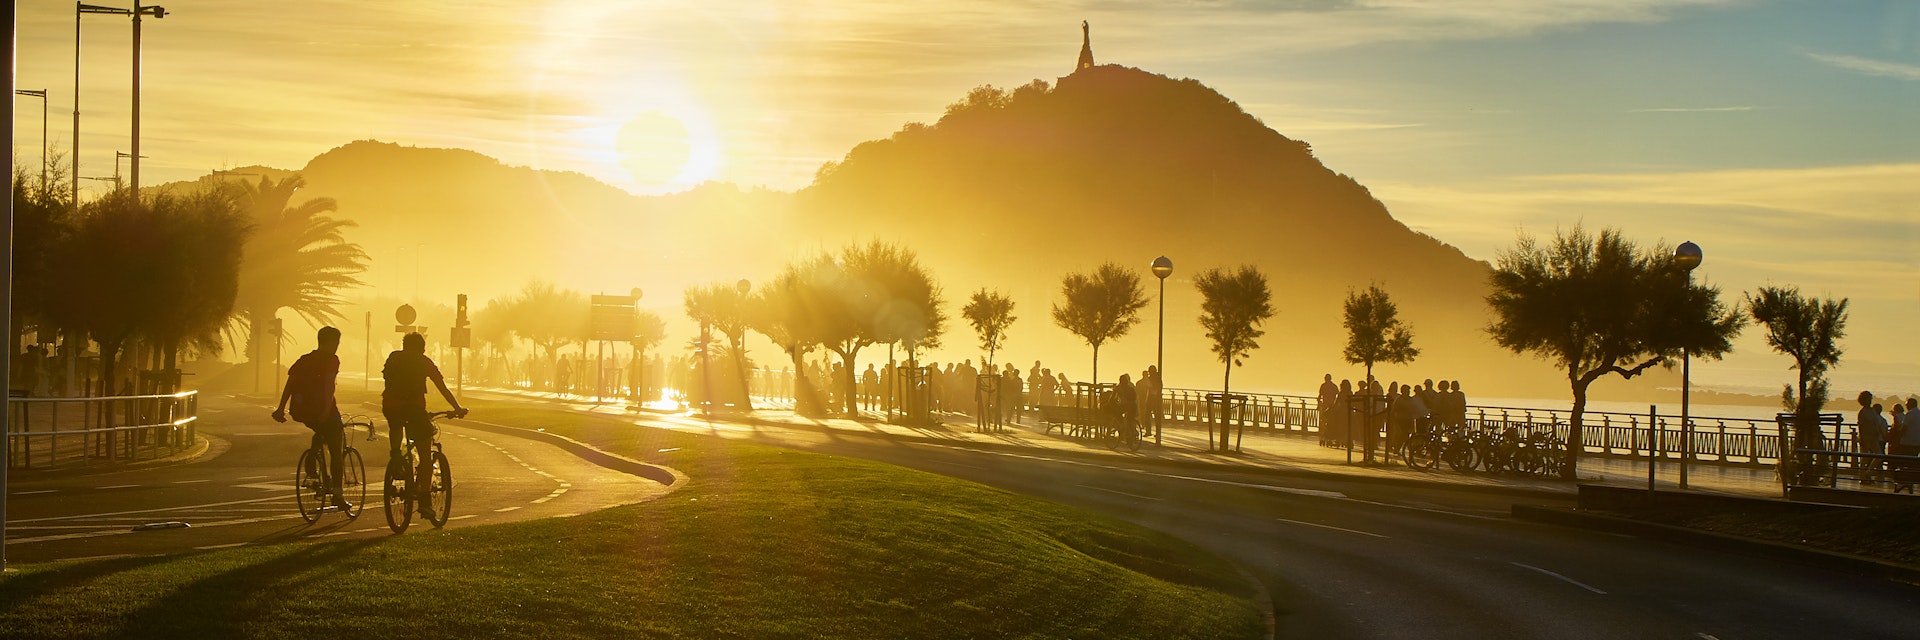 The sun sets behind the Monte Urgull of San Sebastian, Basque Country, Guipuzcoa. Spain. View from Zurriola Avenue.